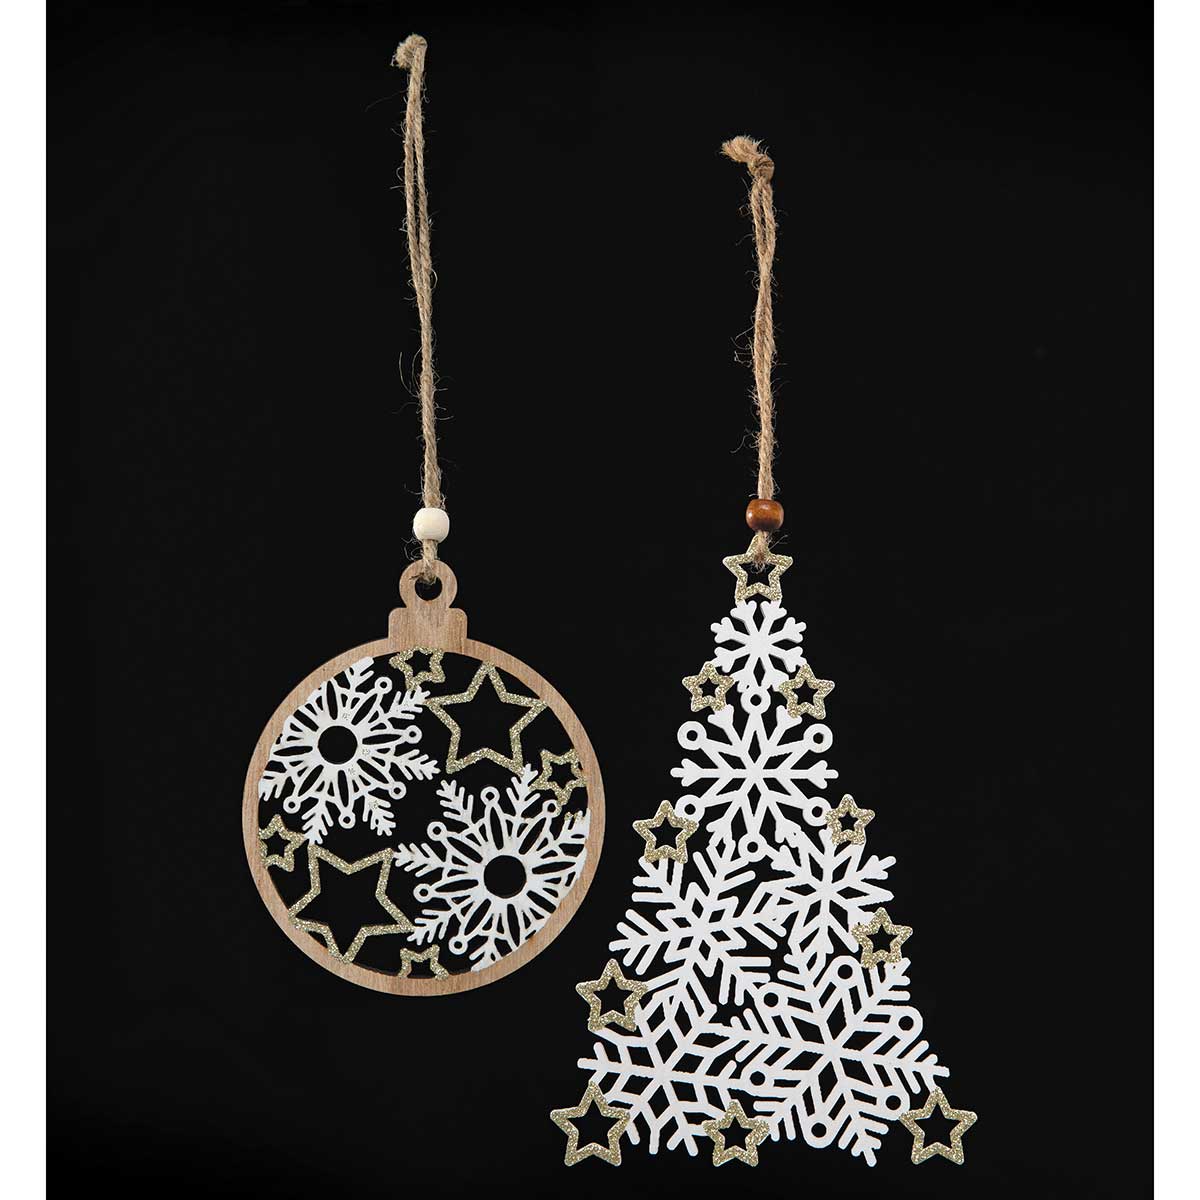 ORNAMENT TREE OF SNOWFLAKES 4.75IN X .25IN X 7.25IN